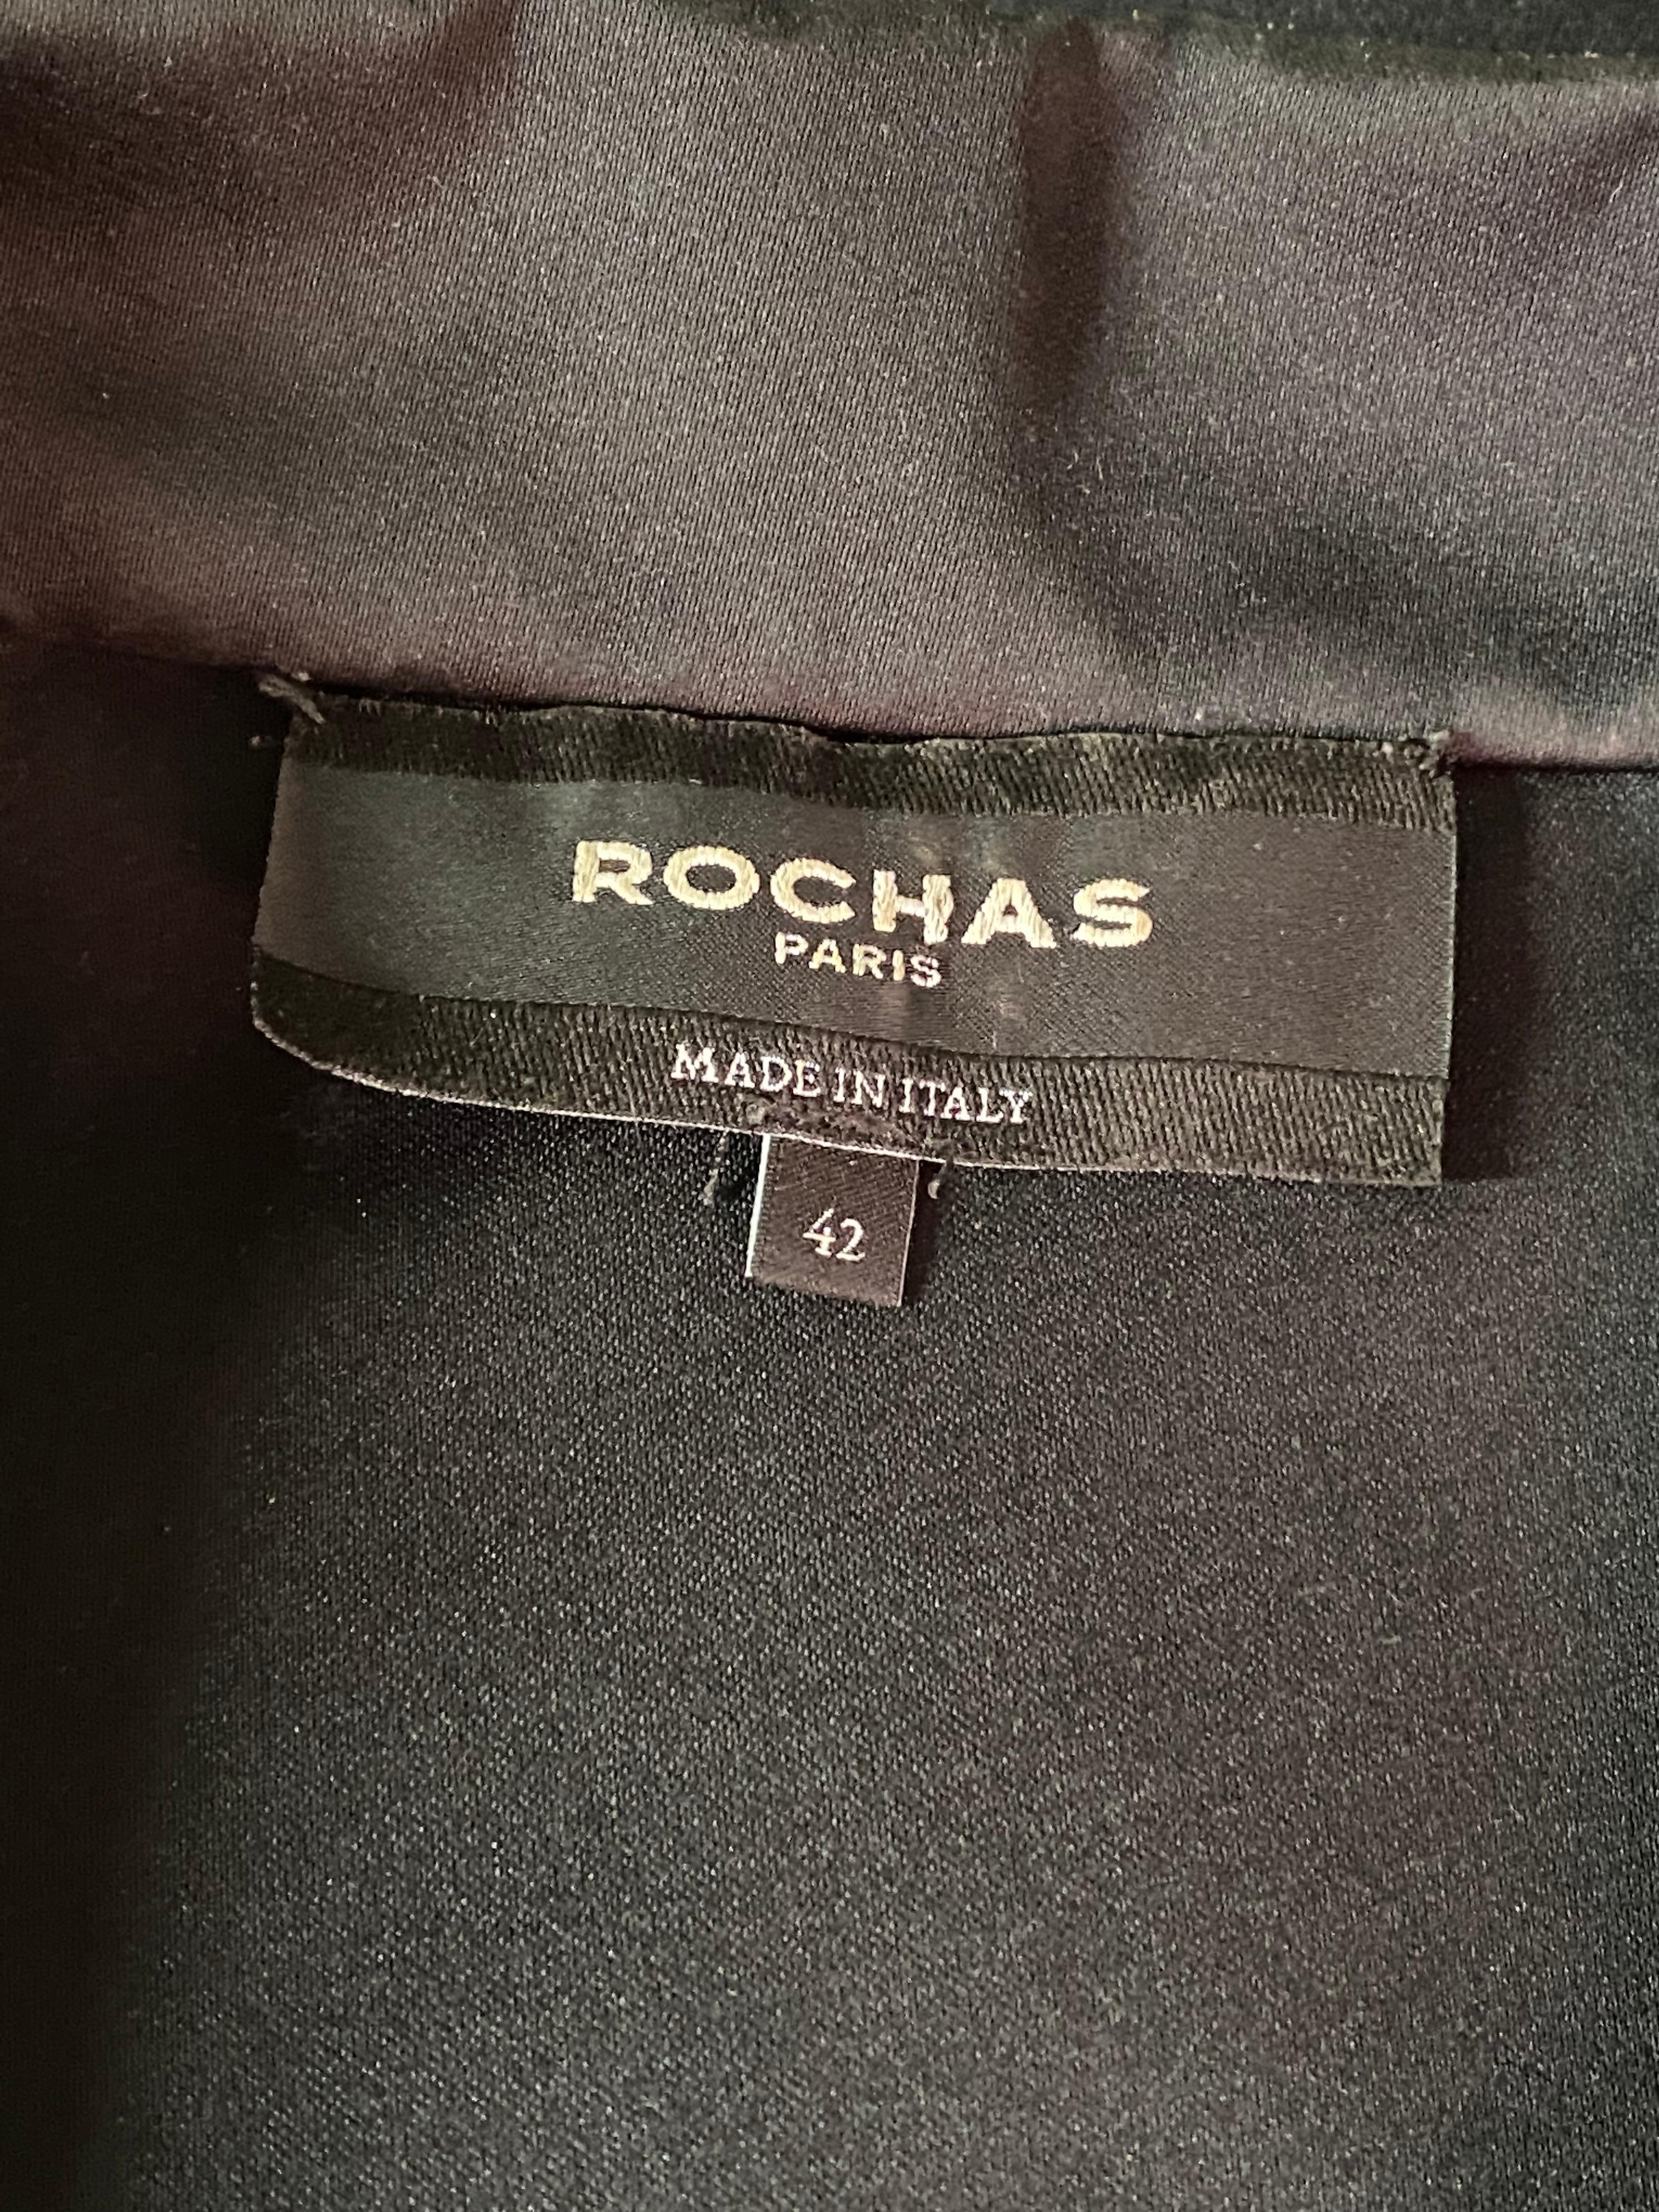 Rochas Black Short Sleeves Button Down Blouse Shirt Top, Size 42 For Sale 3